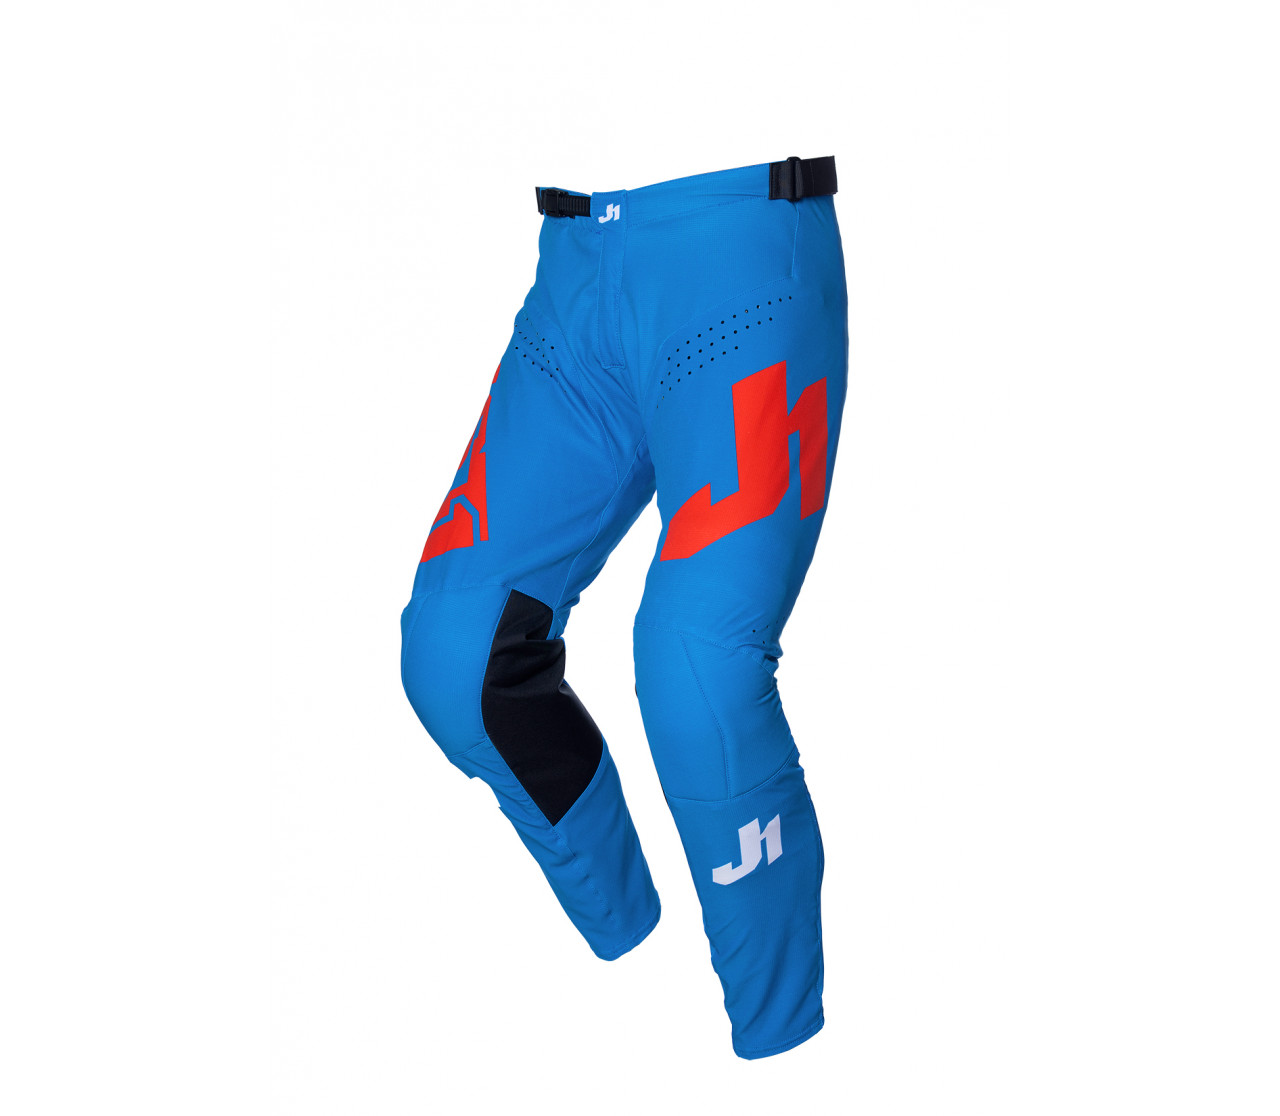 JUST1 PANTS J-ESSENTIAL BLUE RED WHITE